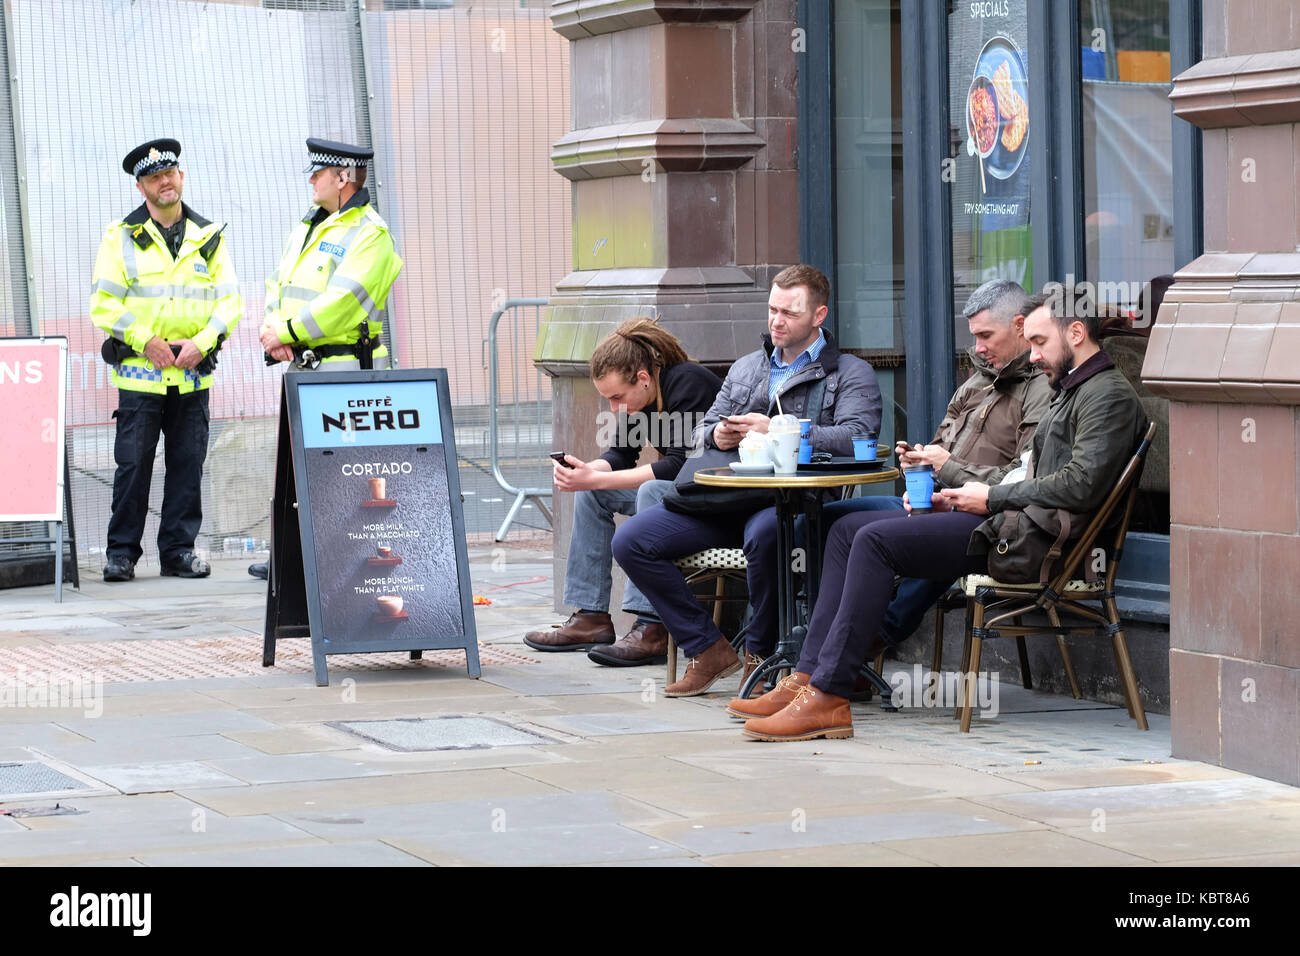 Central Manchester UK, Sunday 1st October 2017 - Conservative Party delegates enjoy a coffee break just outside the central Conservative Party Conference zone in the city centre on the opening day of the Conservative Party Conference. Steven May / Alamy Live News Stock Photo